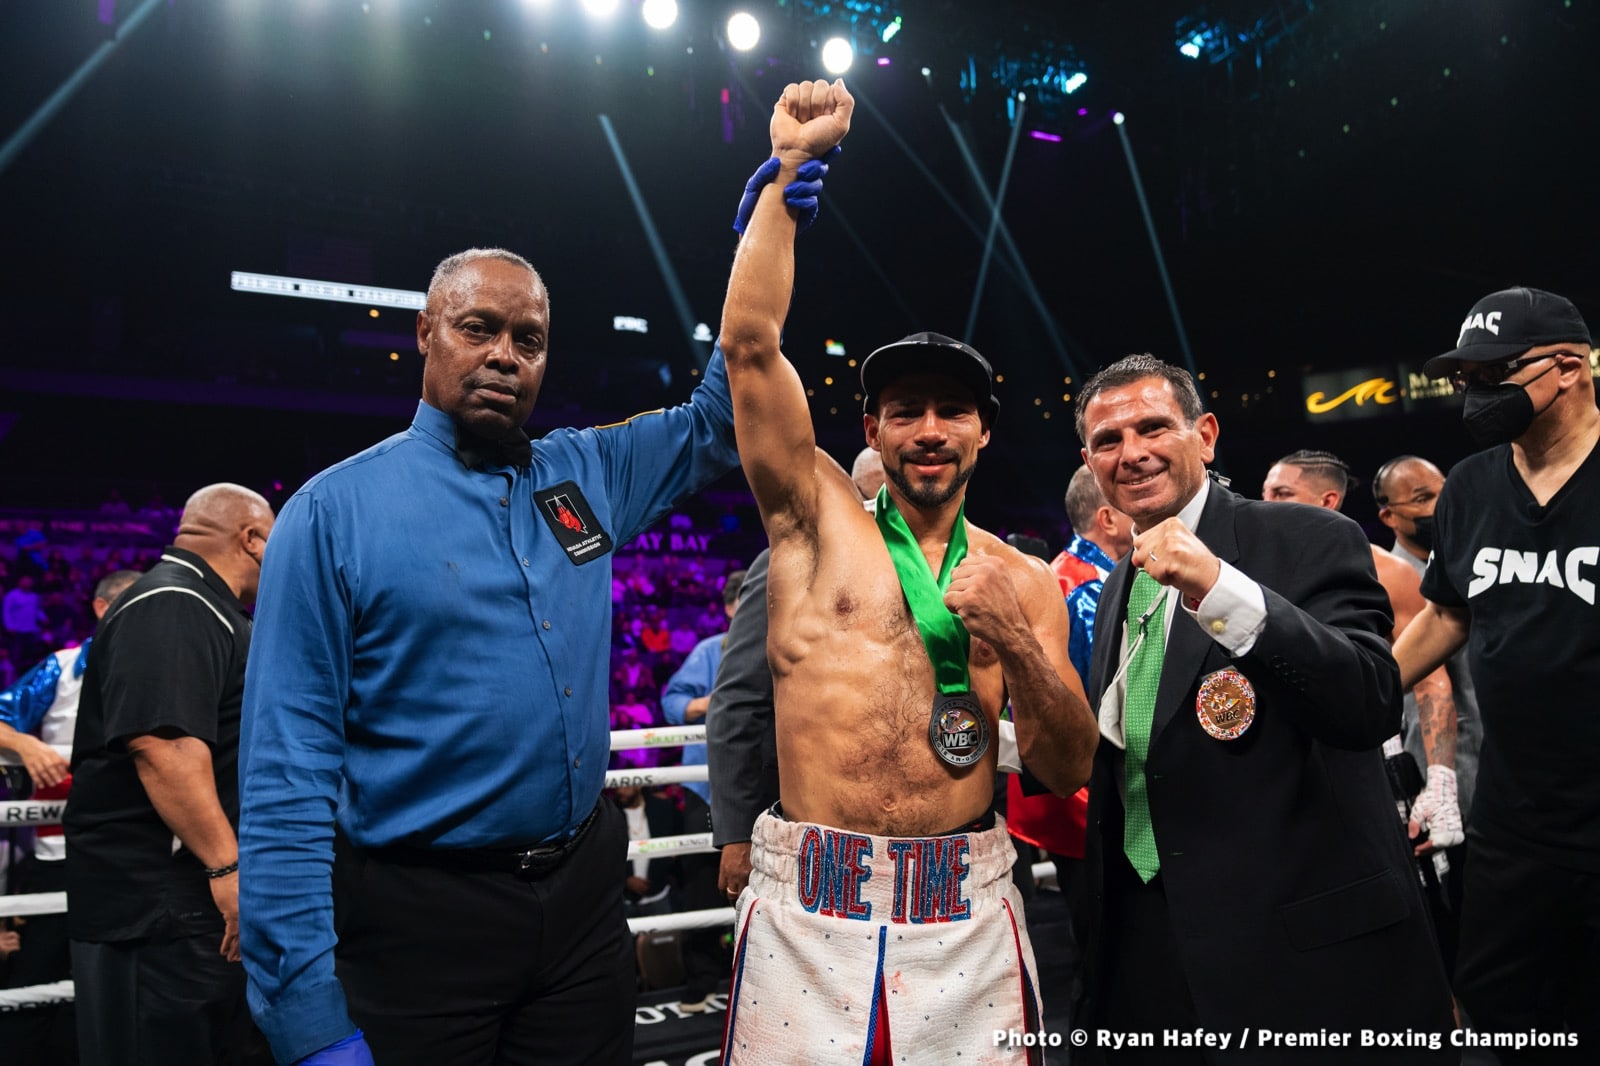 Keith Thurman, Terence Crawford boxing photo and news image